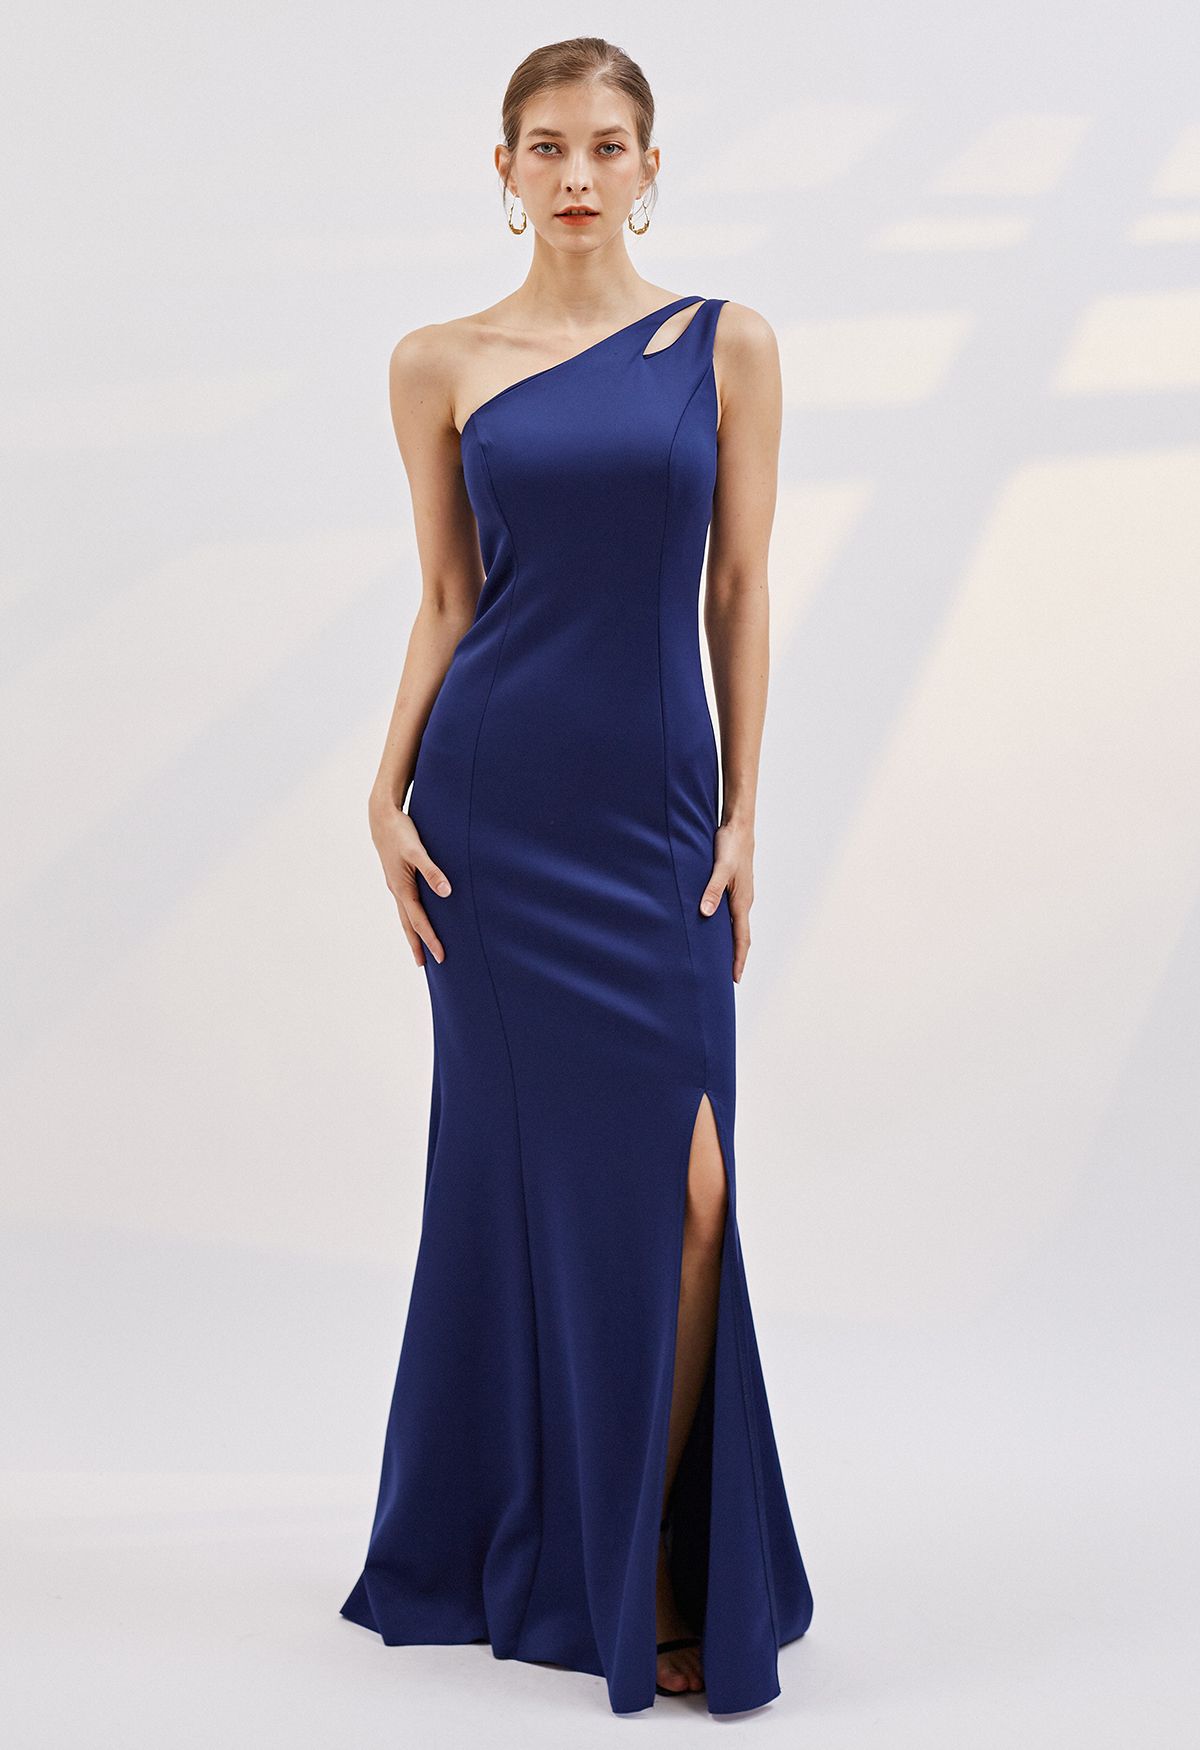 One-Shoulder Dual Strap Mermaid Gown in Navy - Retro, Indie and Unique ...